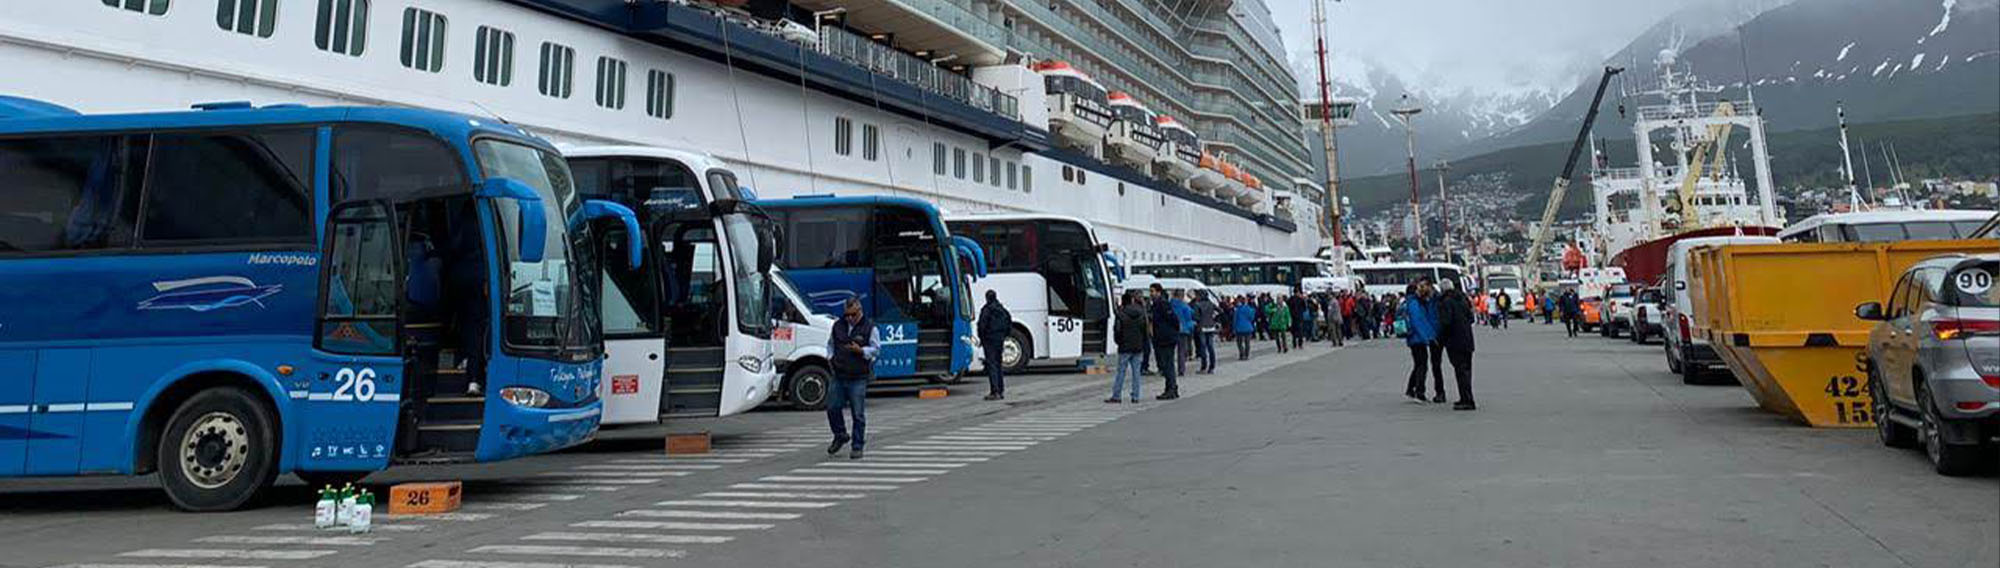 Large buses parked by a port.